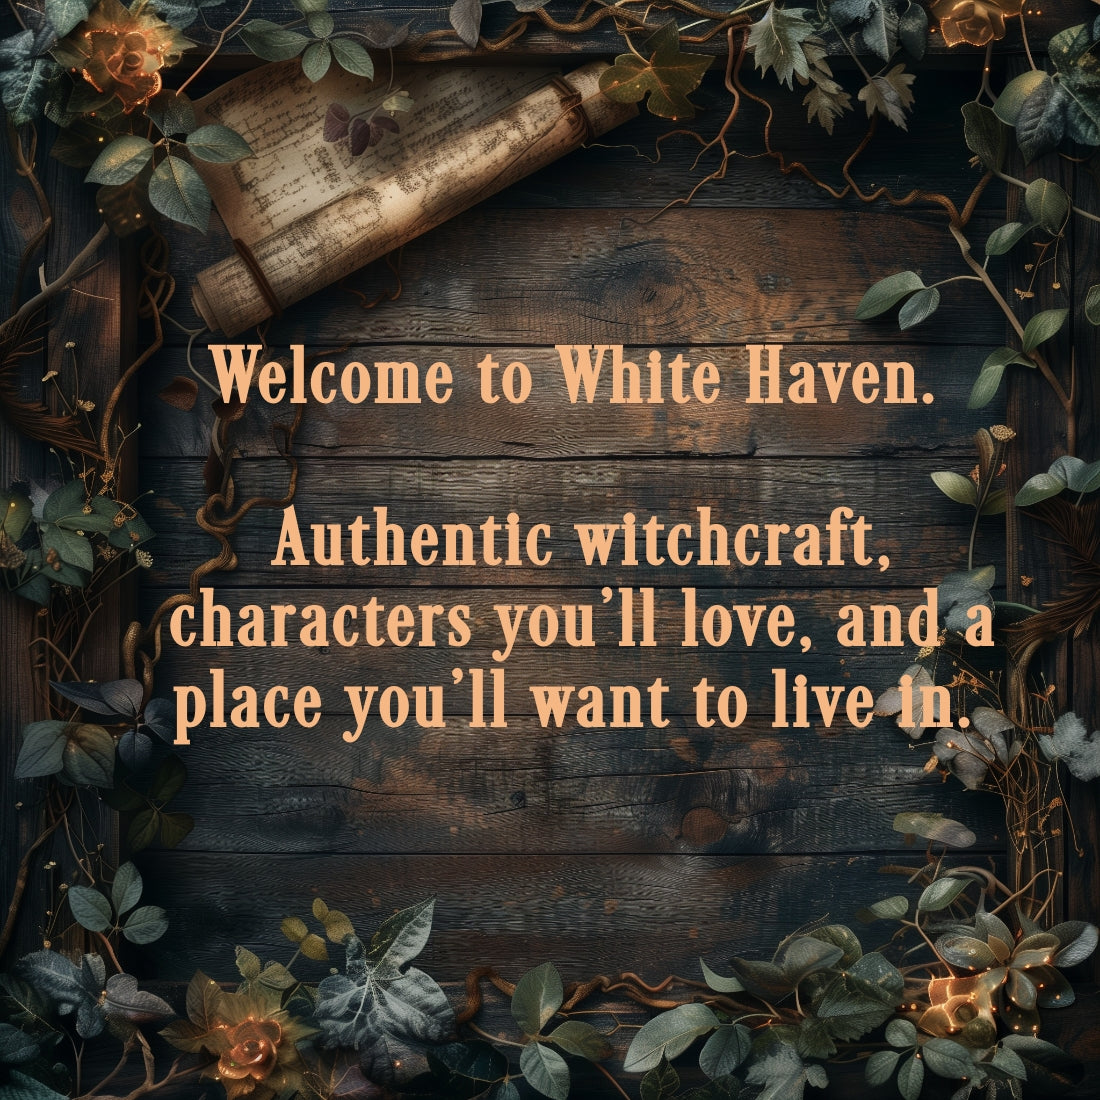 white haven witches, paranormal mysteries. supernatural, witchcraft, wicca, occult fiction, cozy mystery